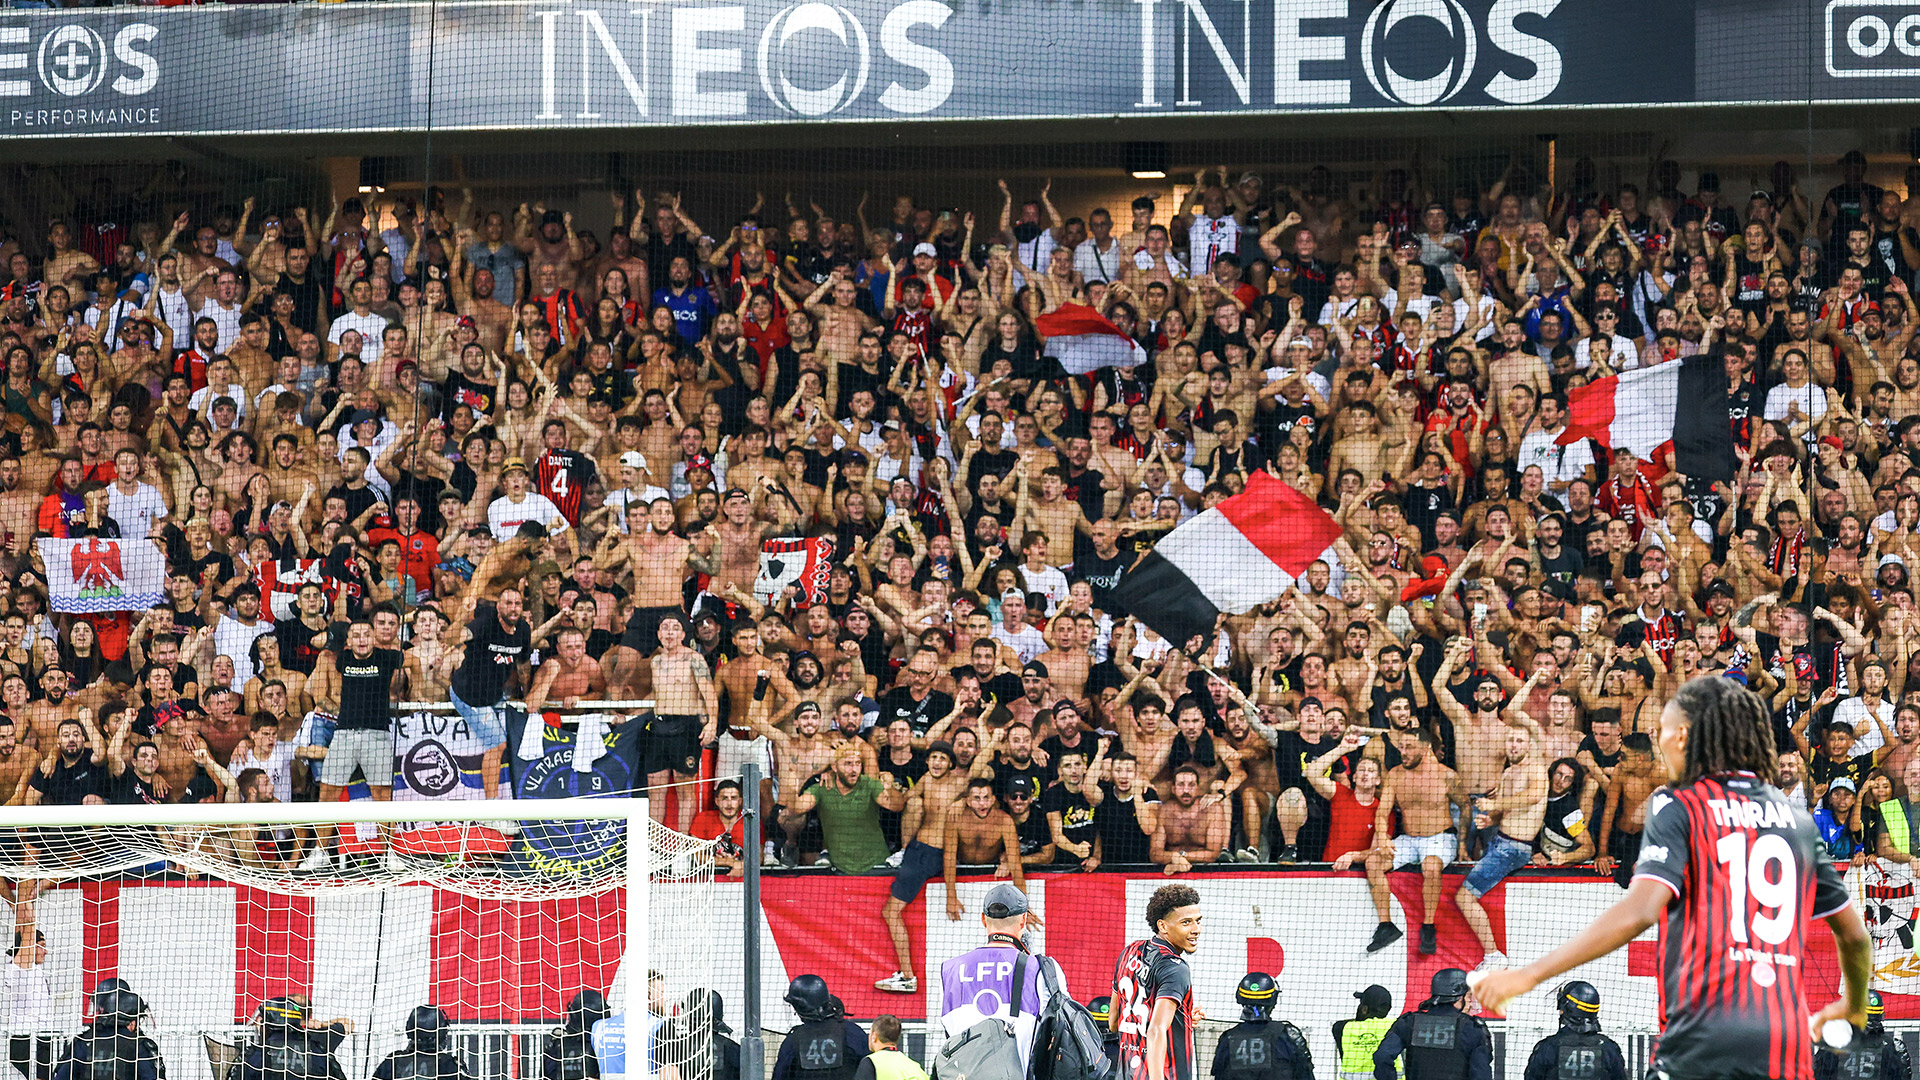 Ticket sales open for all OGC Nice fans.